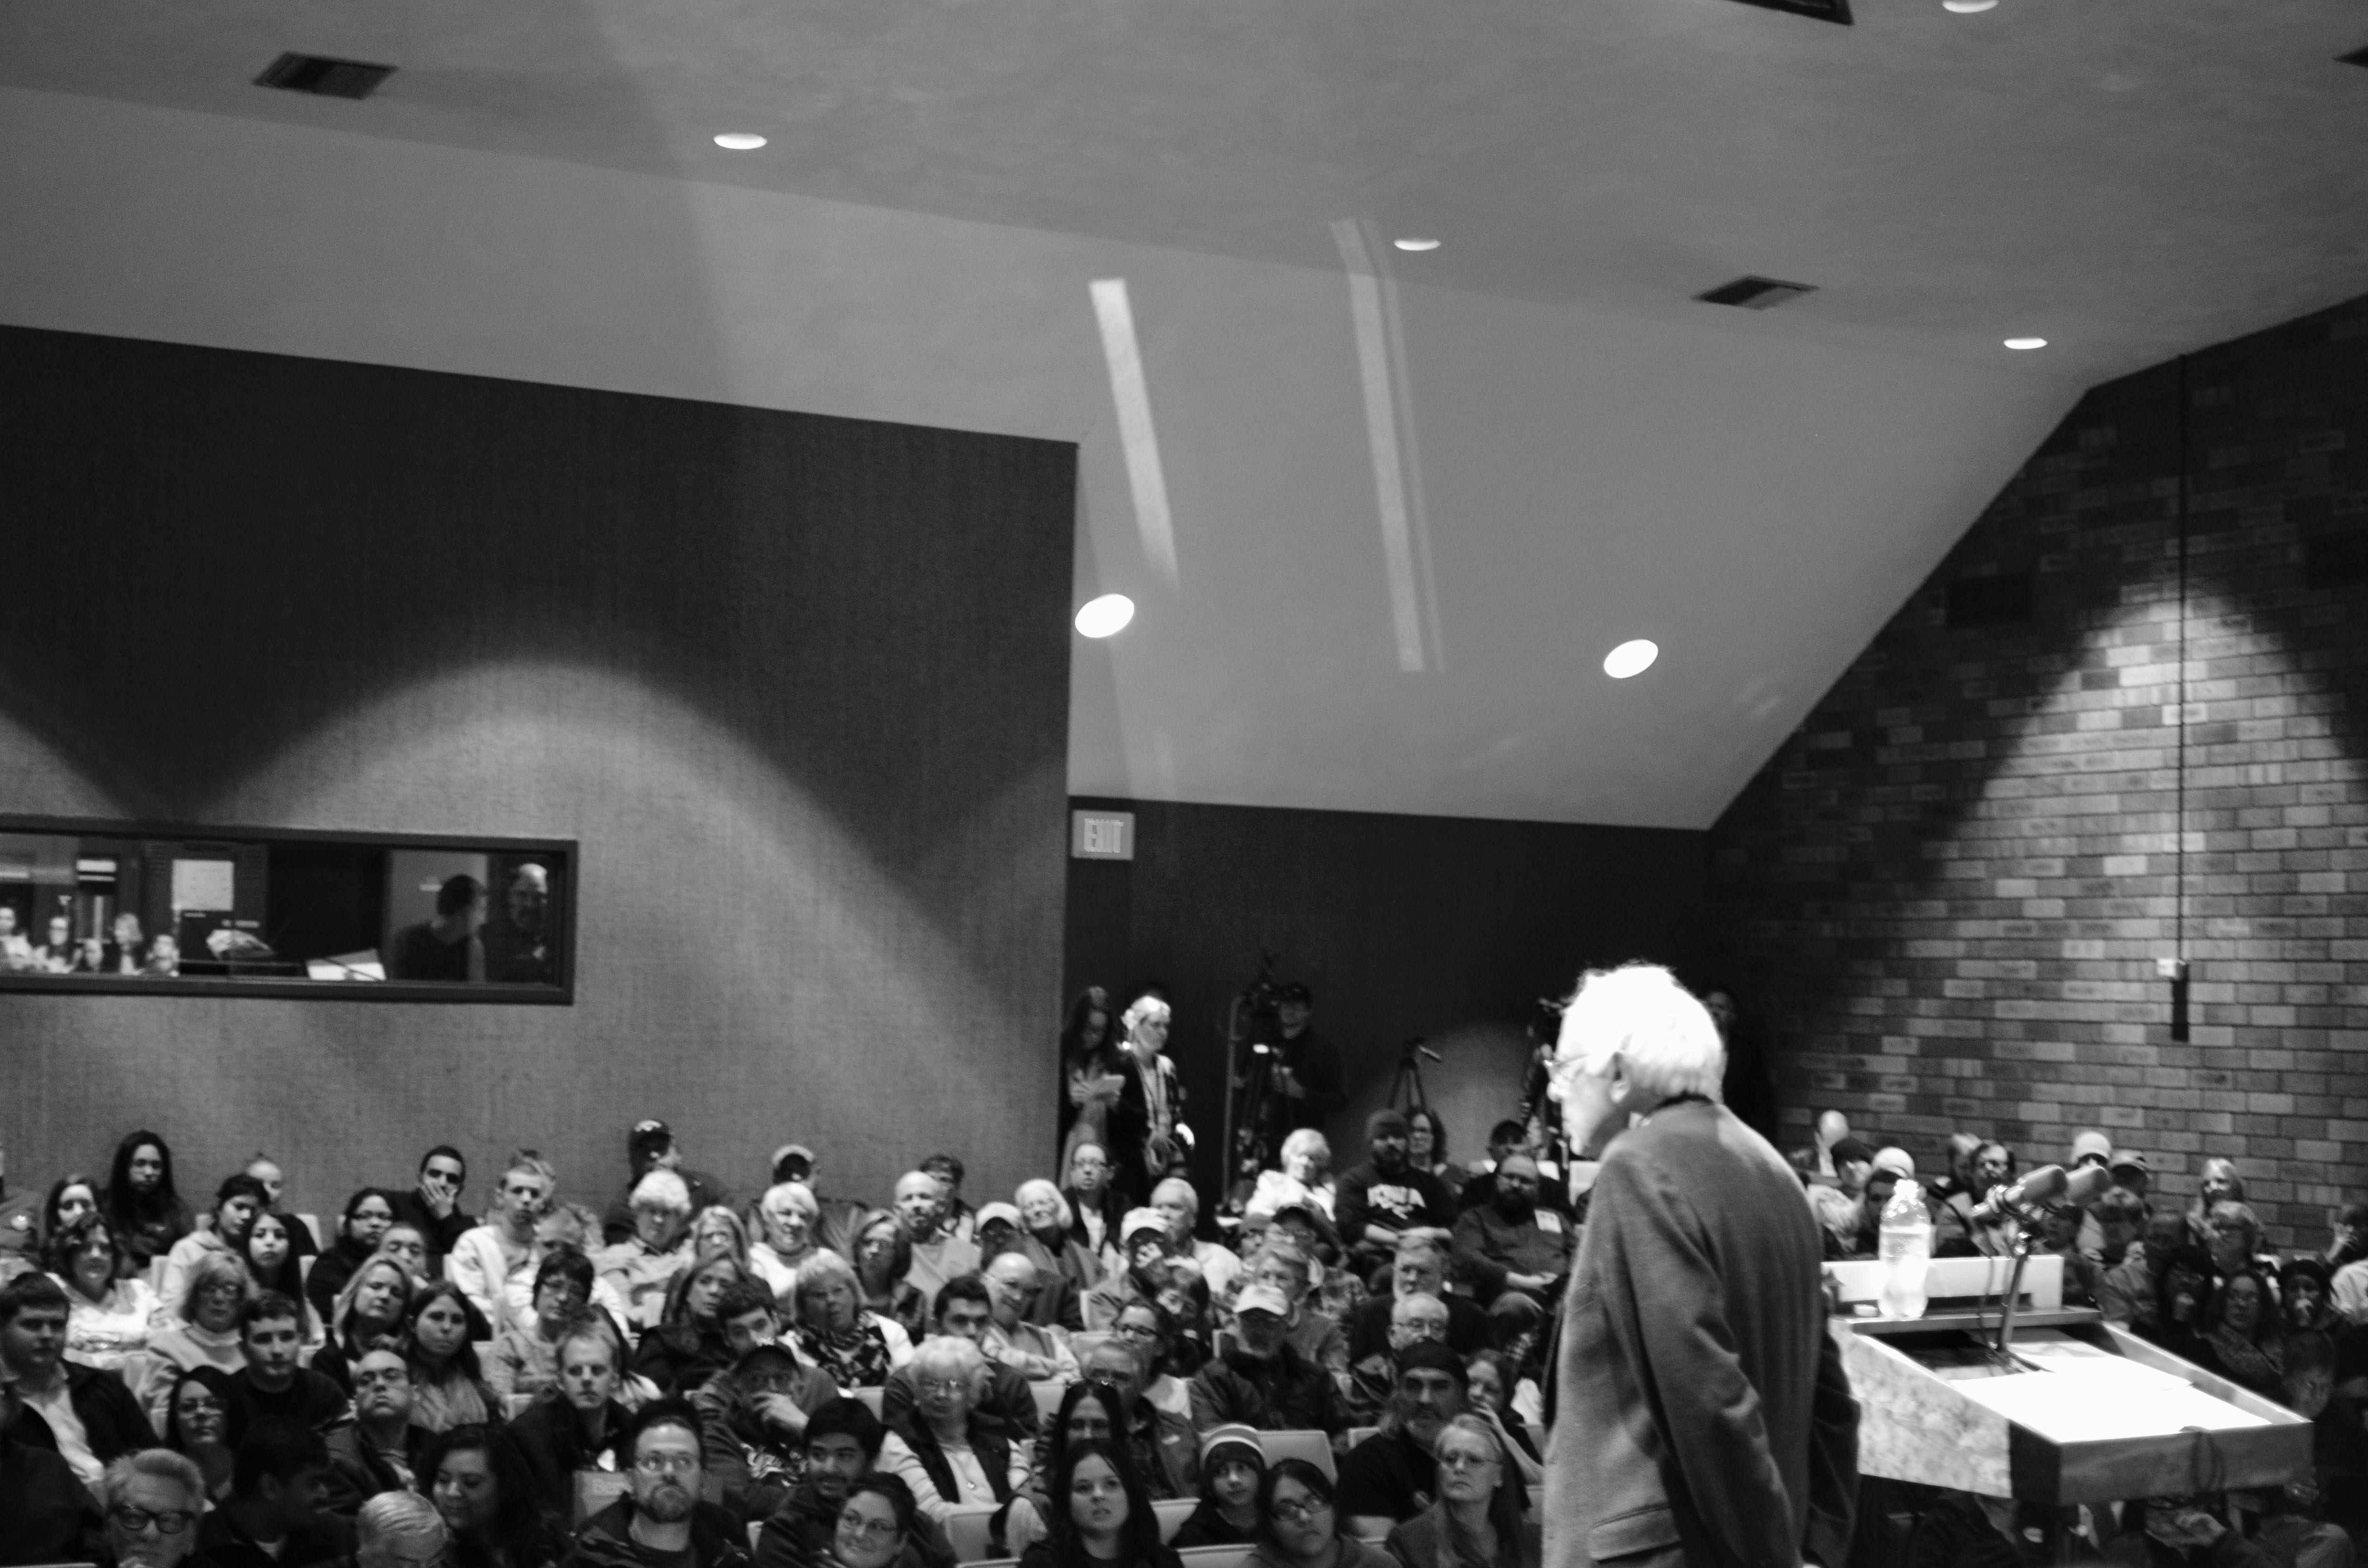 Photo of Bernie Sanders and audience at Perry, Iowa, by Monica Alexander.